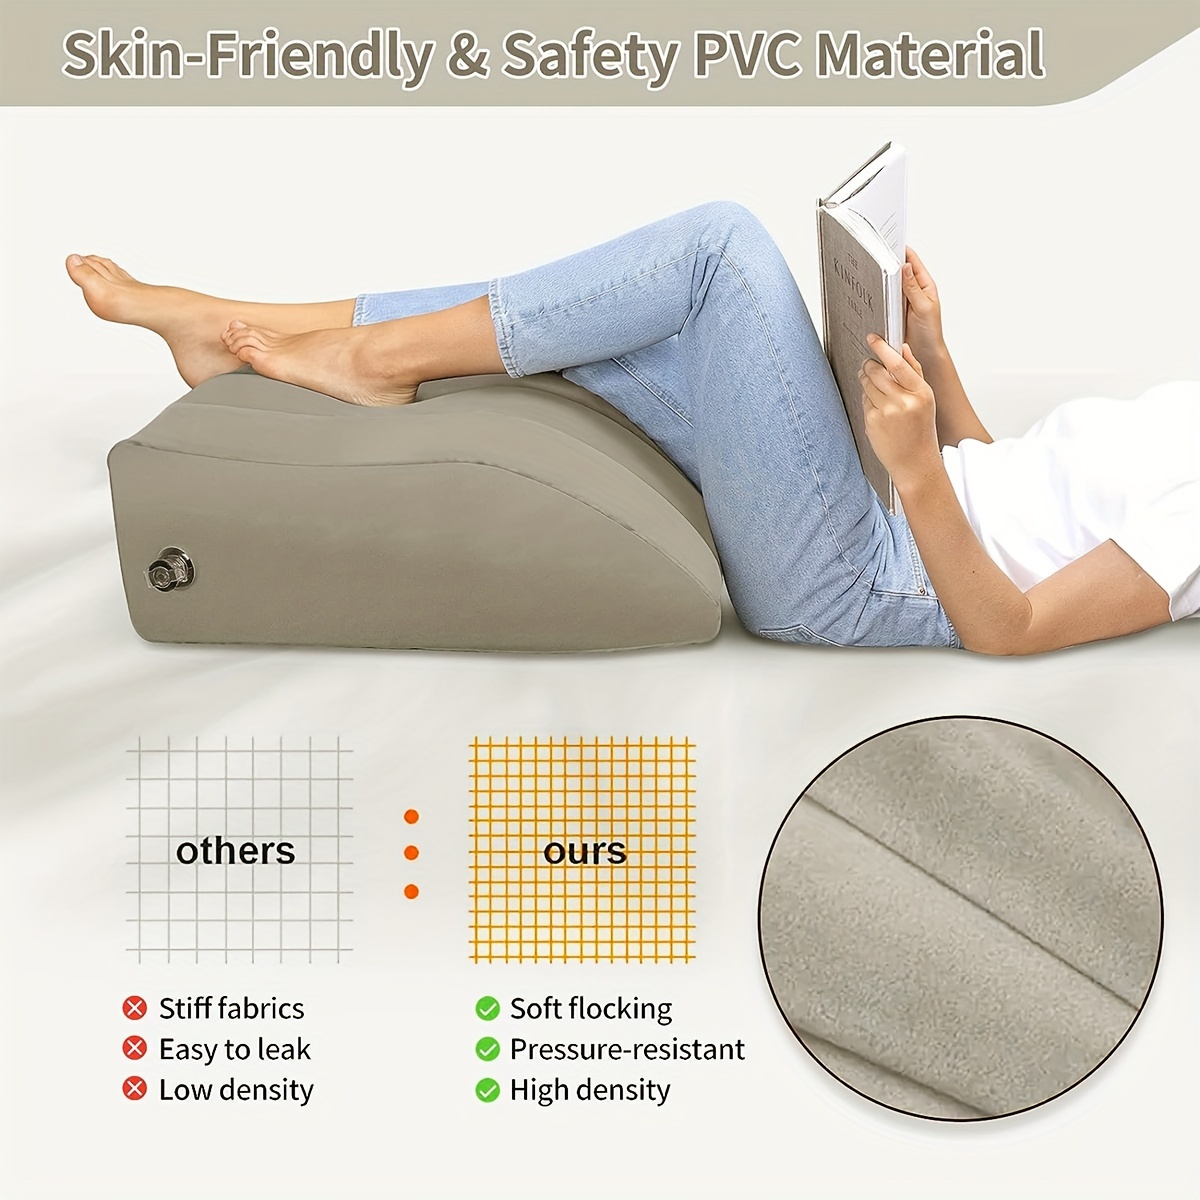 Pvc Flocking Leg Elevation Pillow Inflatable Wedge Pillows, Comfort Leg  Pillows For Sleeping Leg & Back Pain Relief, Leg Support Pillow Leg Wedge  Pillows For After Aurgery, Hip, Foot, Ankle Recovery 